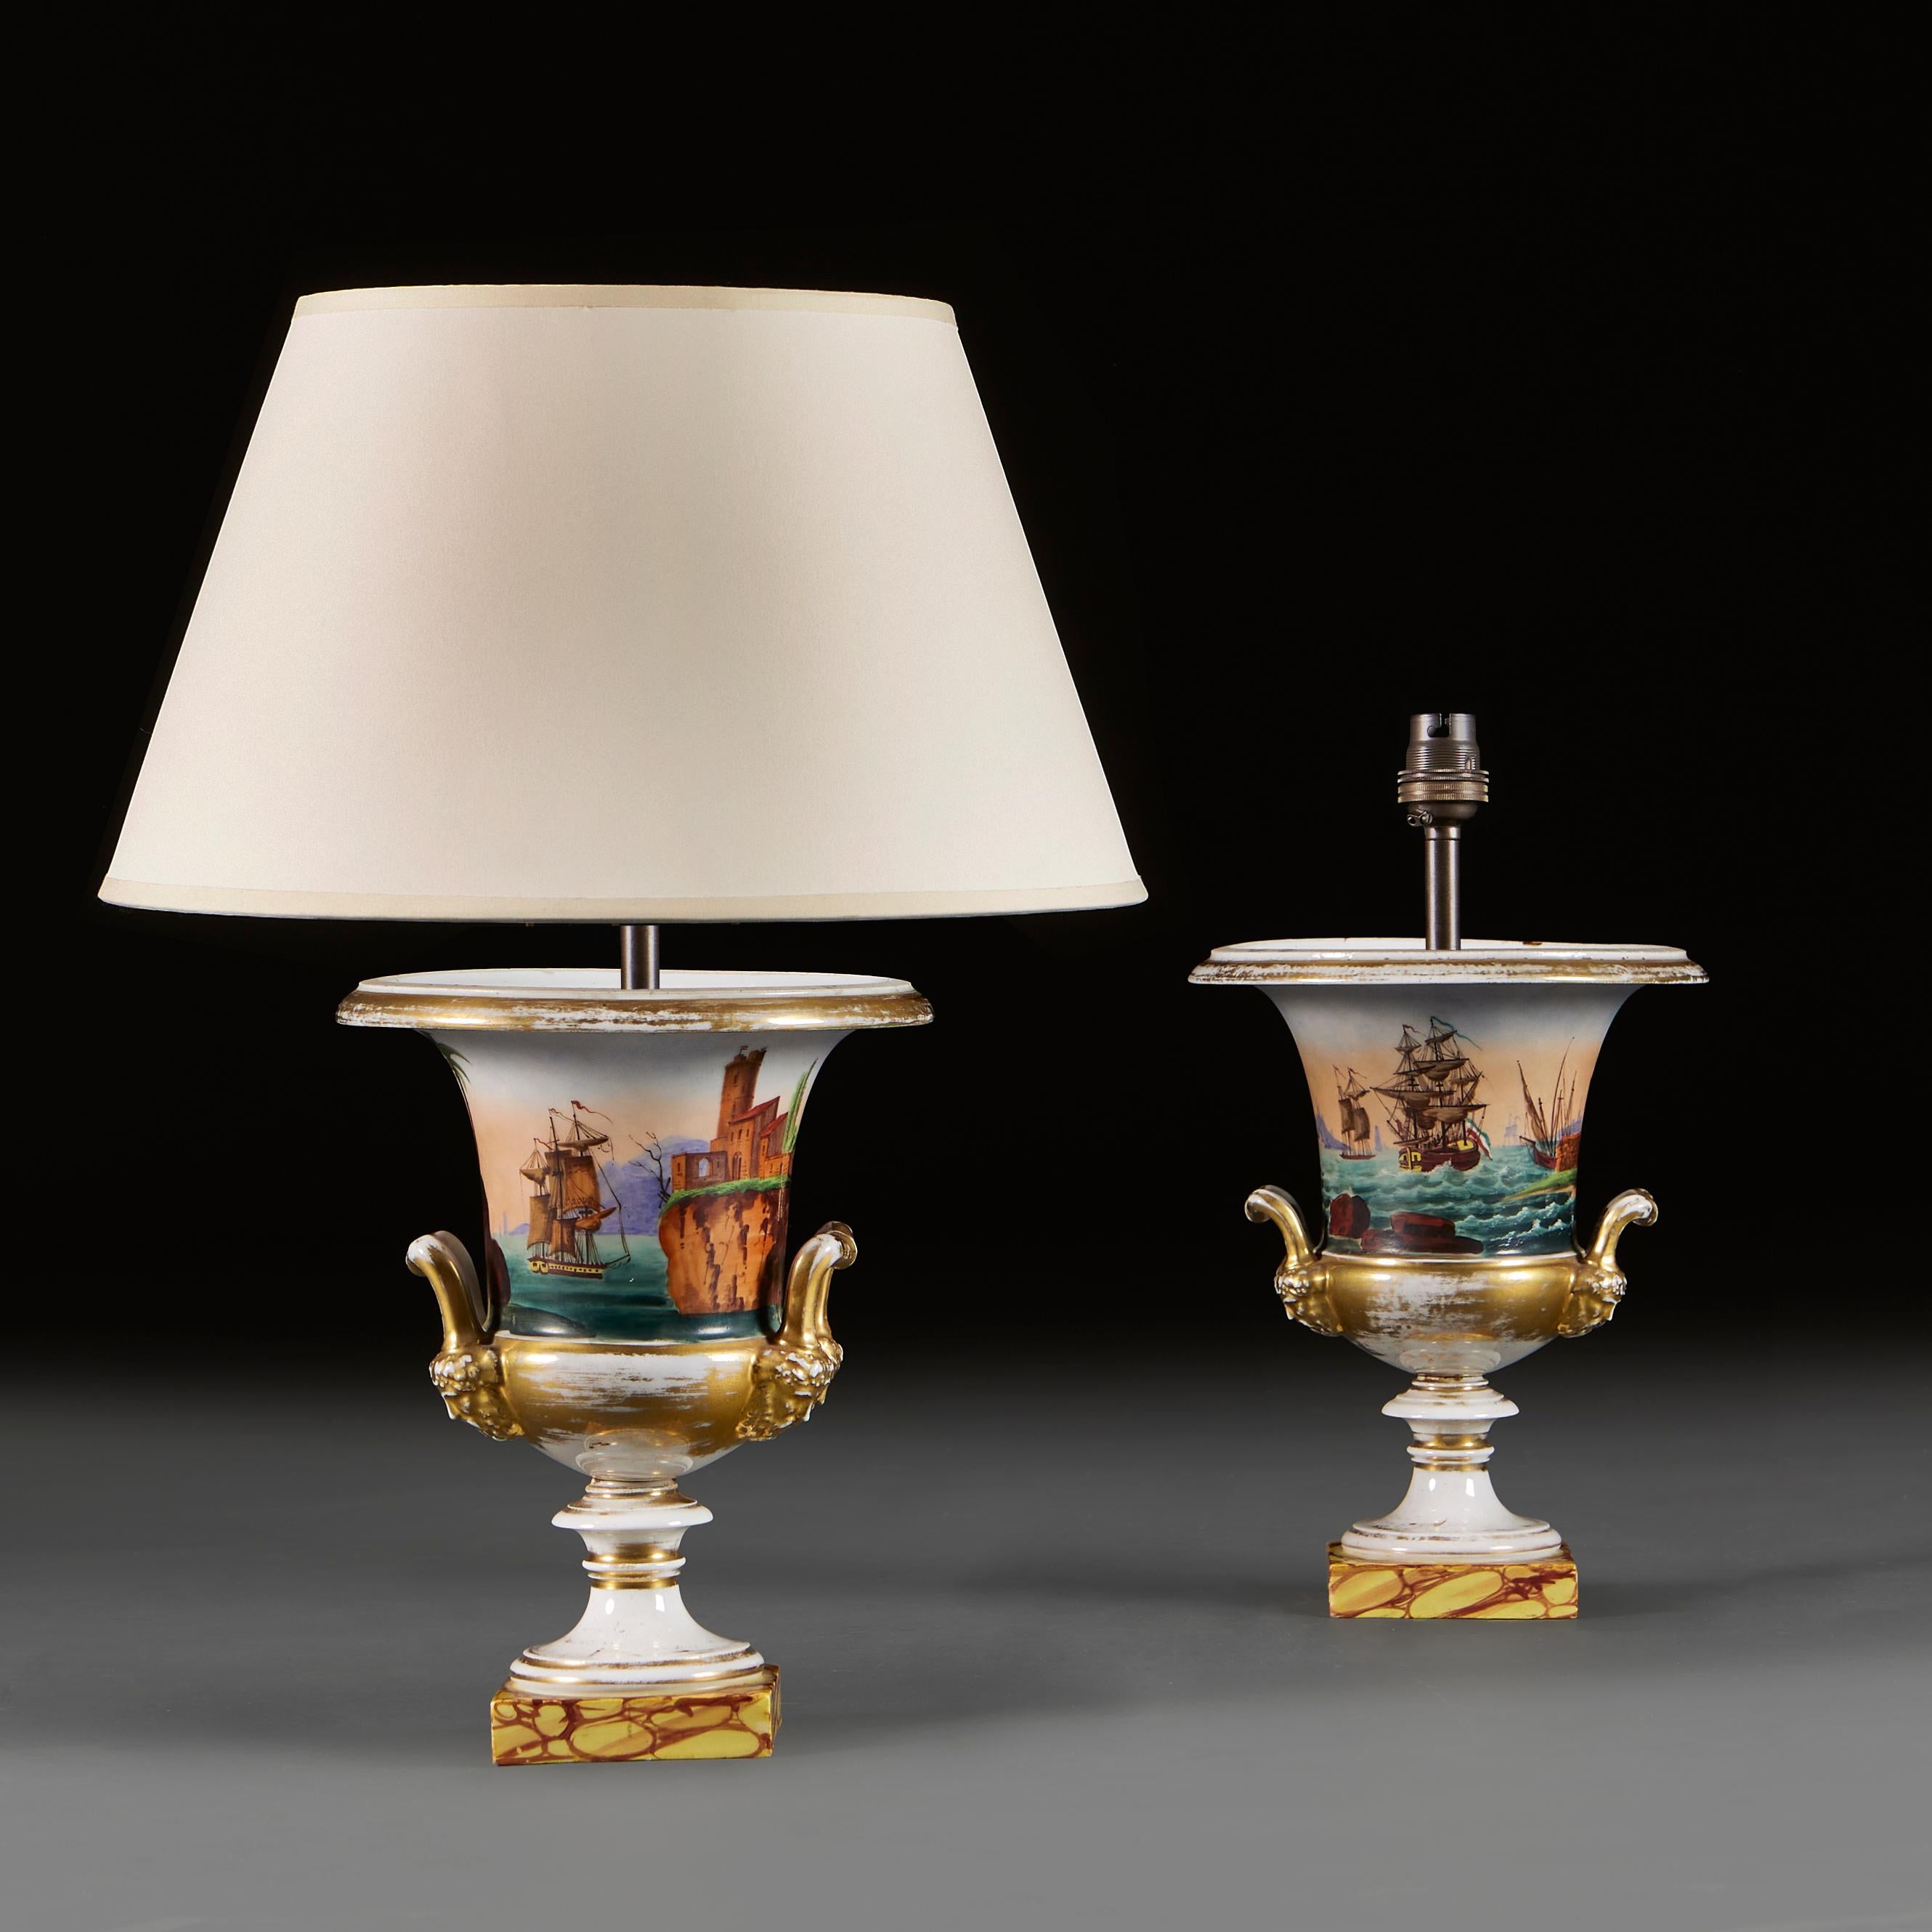 France, circa 1860

A pair of mid ninetieth century urns decorated with maritime scenes, painted with ships and palm trees in a fantasy landscape, with stylised handles and bearded masks, all supported on yellow variegated bases. 

Height of vases  